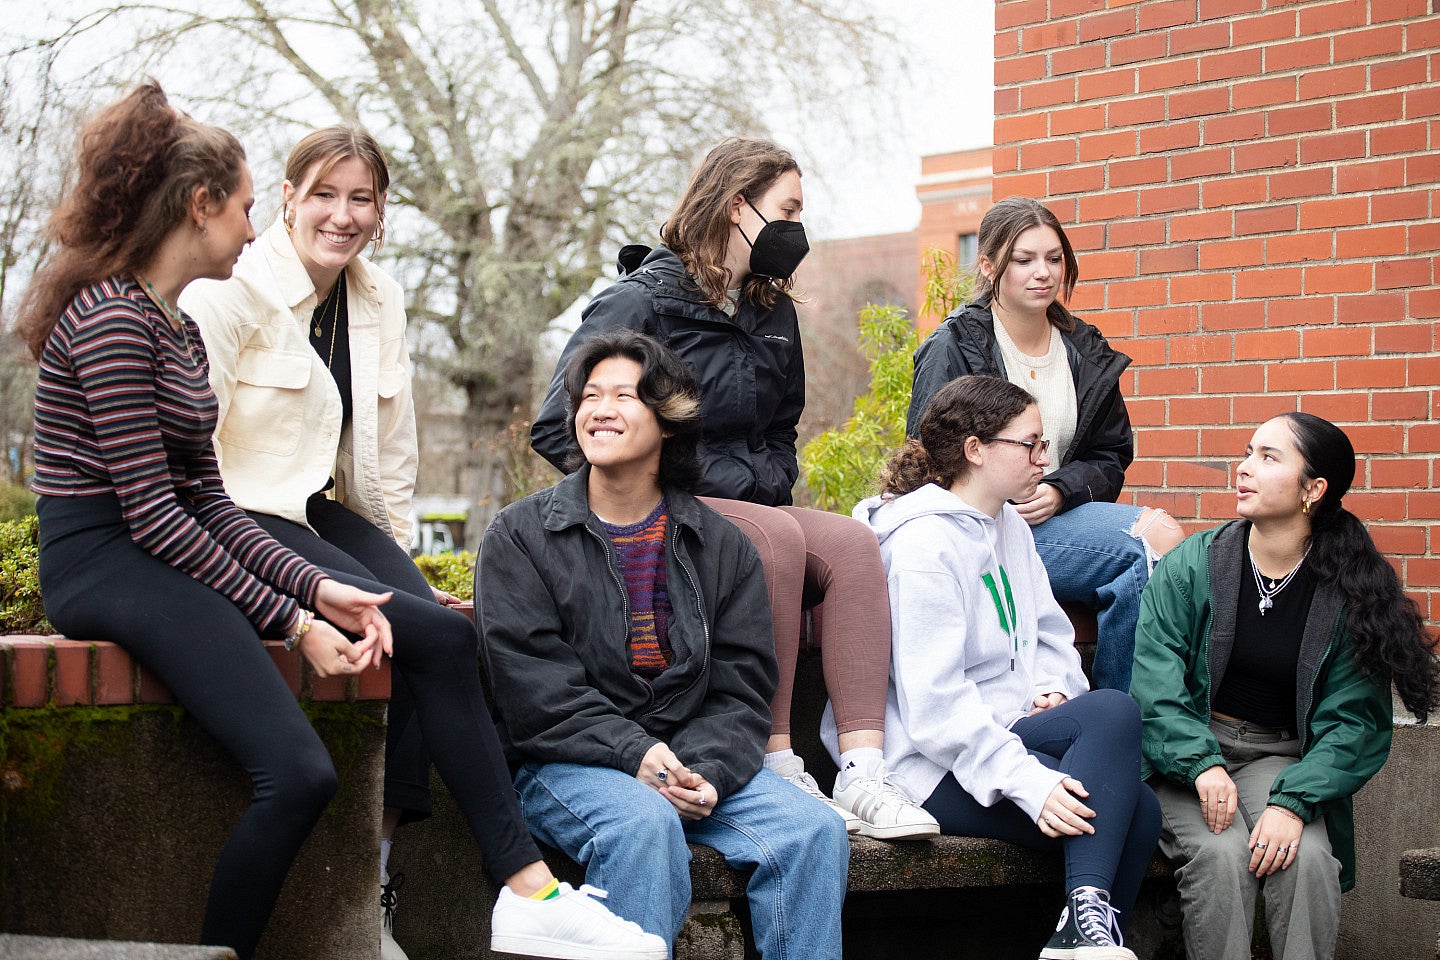 Students conversing outside a brick building in very early spring.